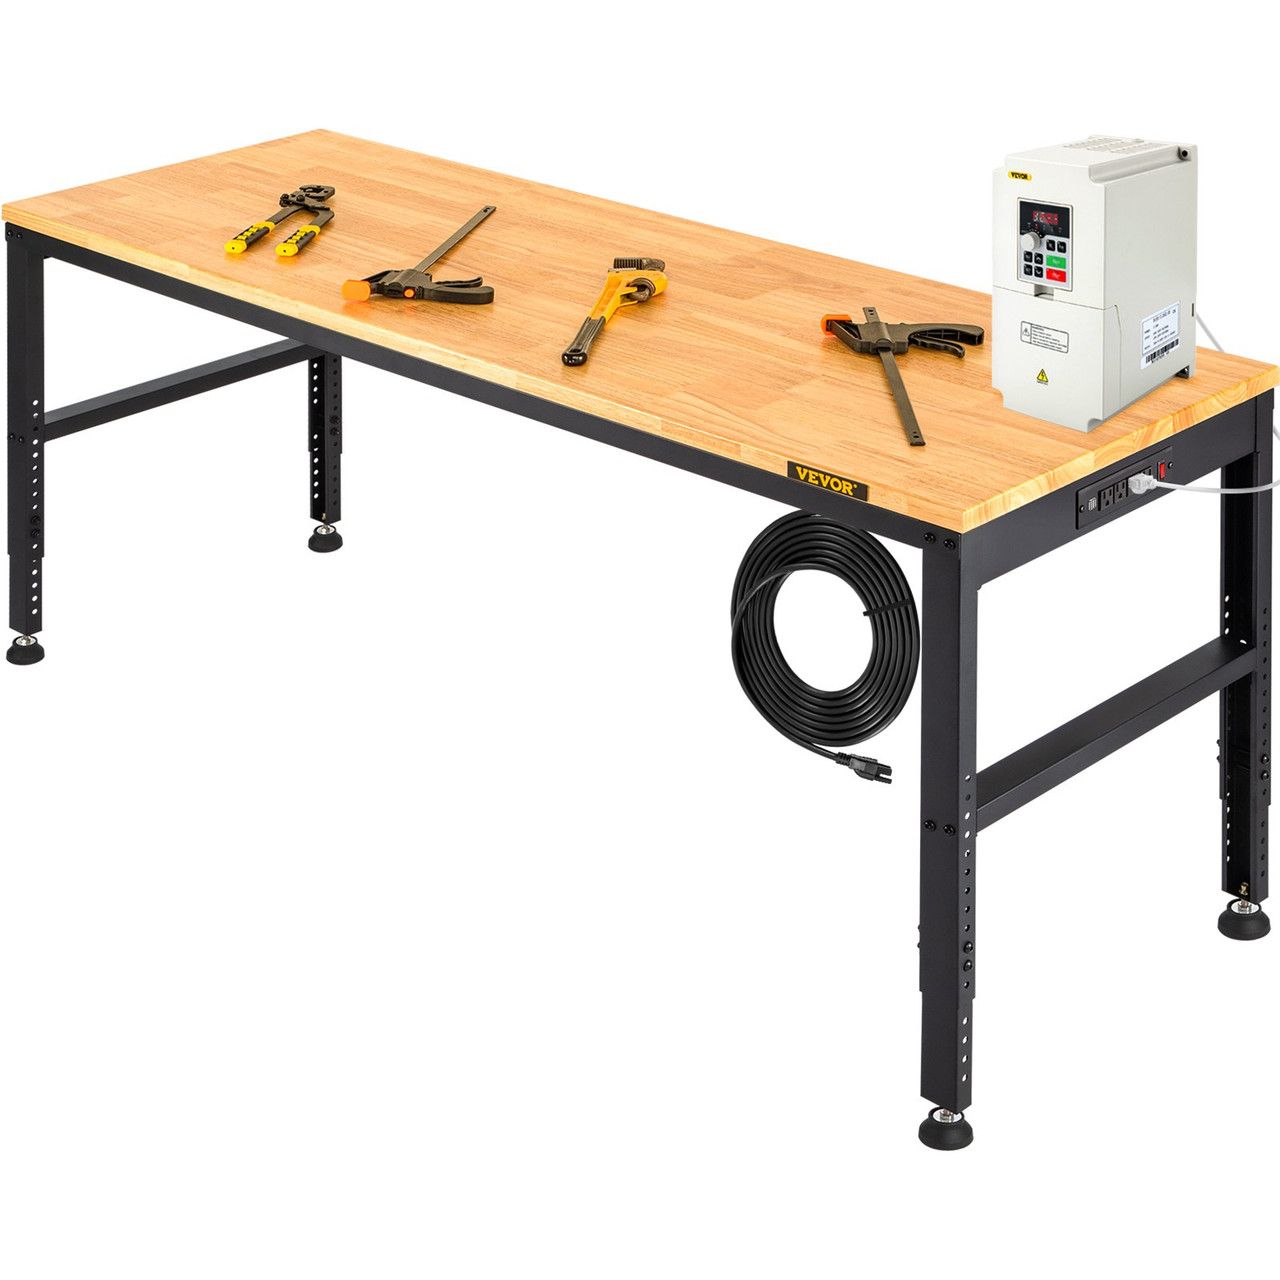 Adjustable Height Workbench 61"L x 20"W Work Bench Table w/ Power Outlets